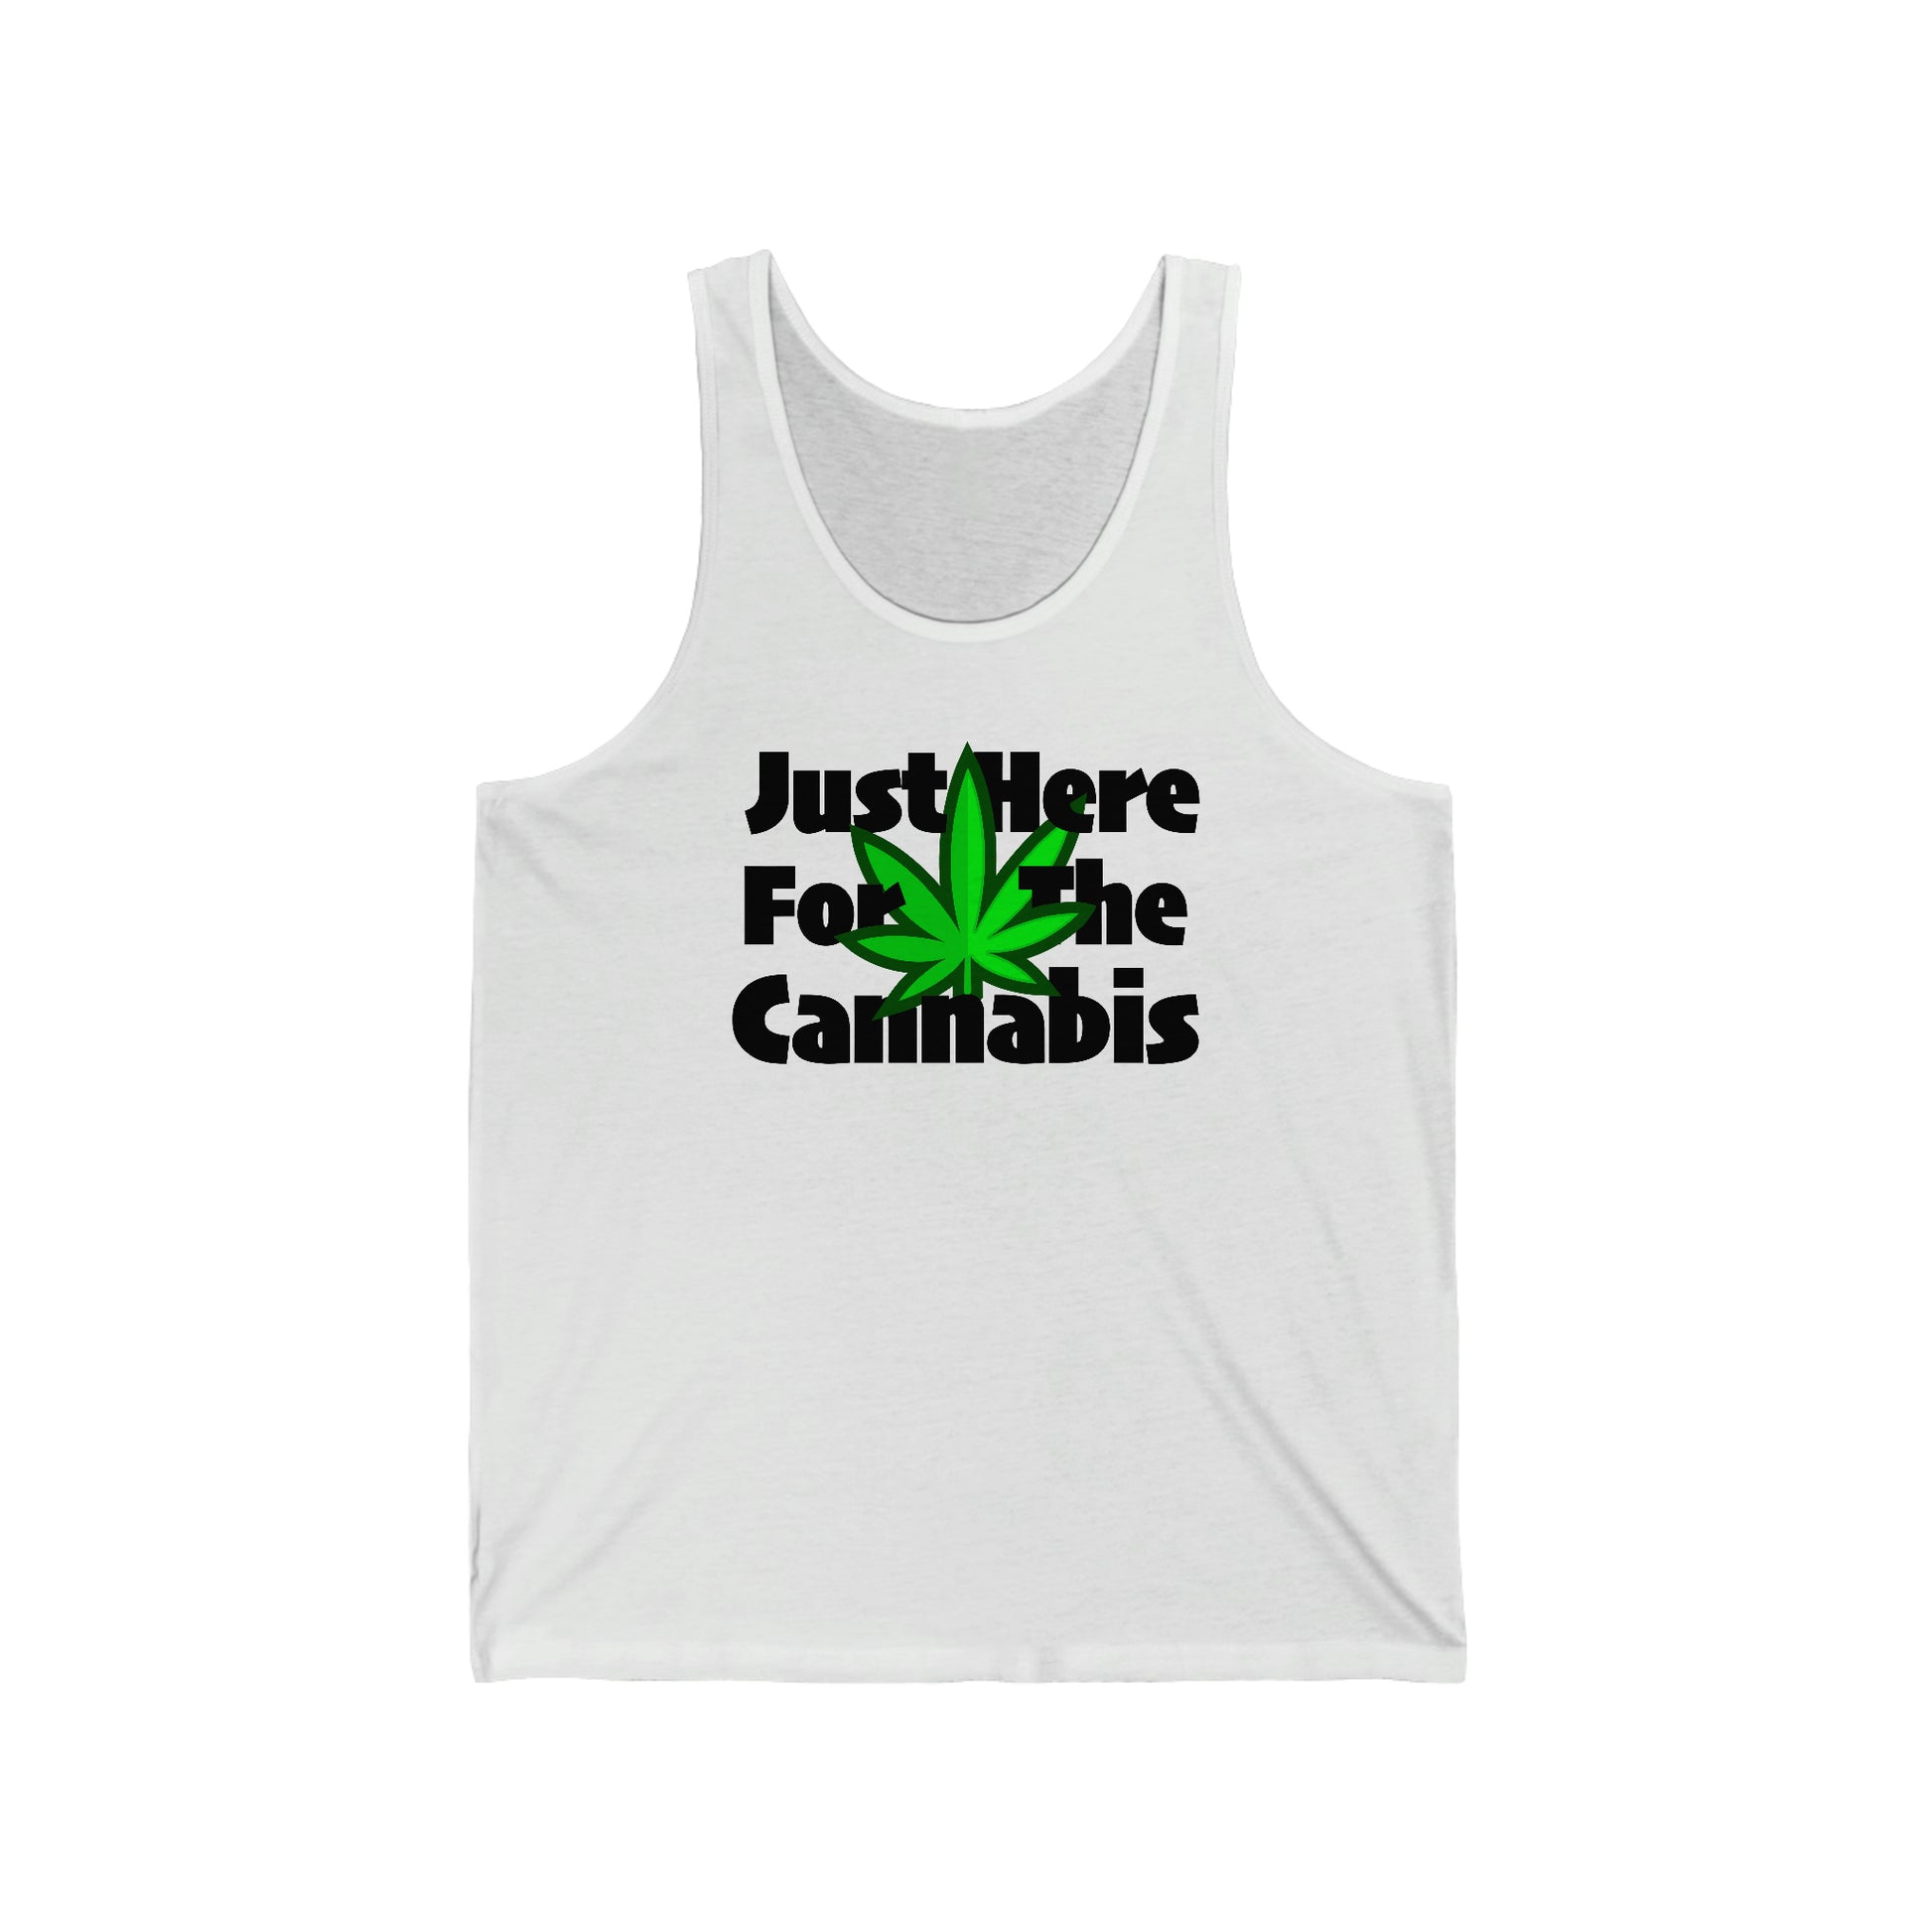 Just here for the Just Here for the Cannabis Jersey Tank Top.